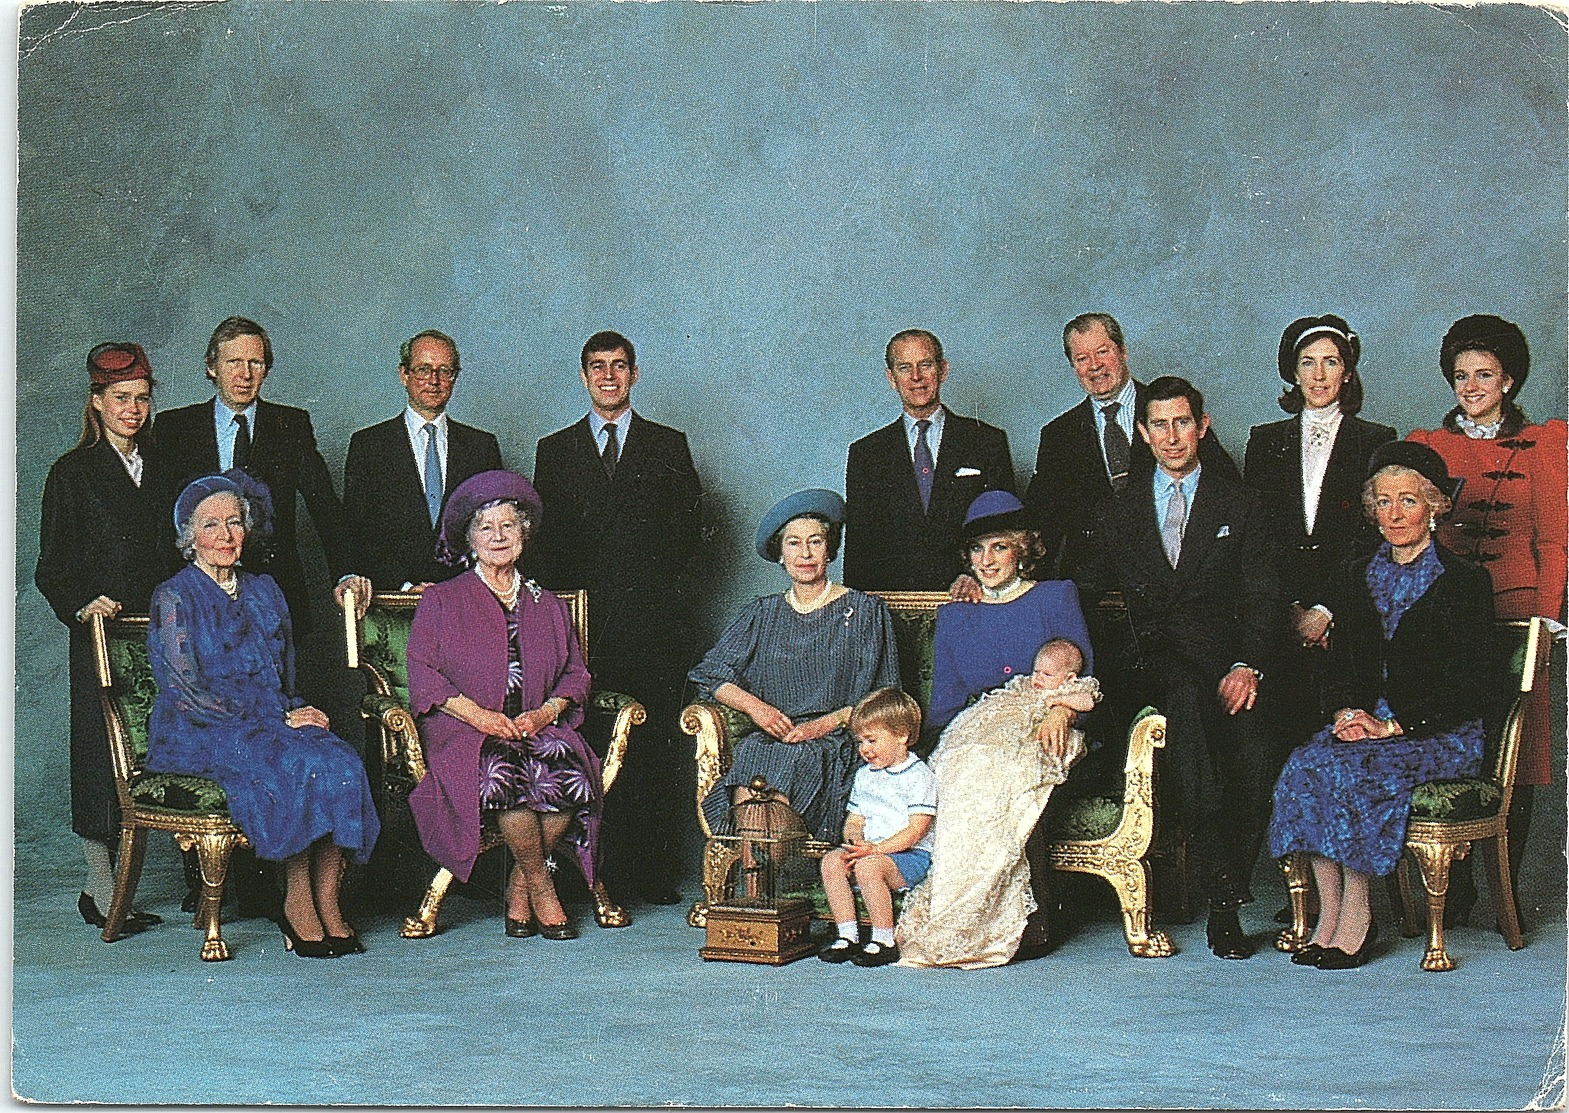 The Royal Family At The Christening Of Prince Henry Of Wales - Royal Families